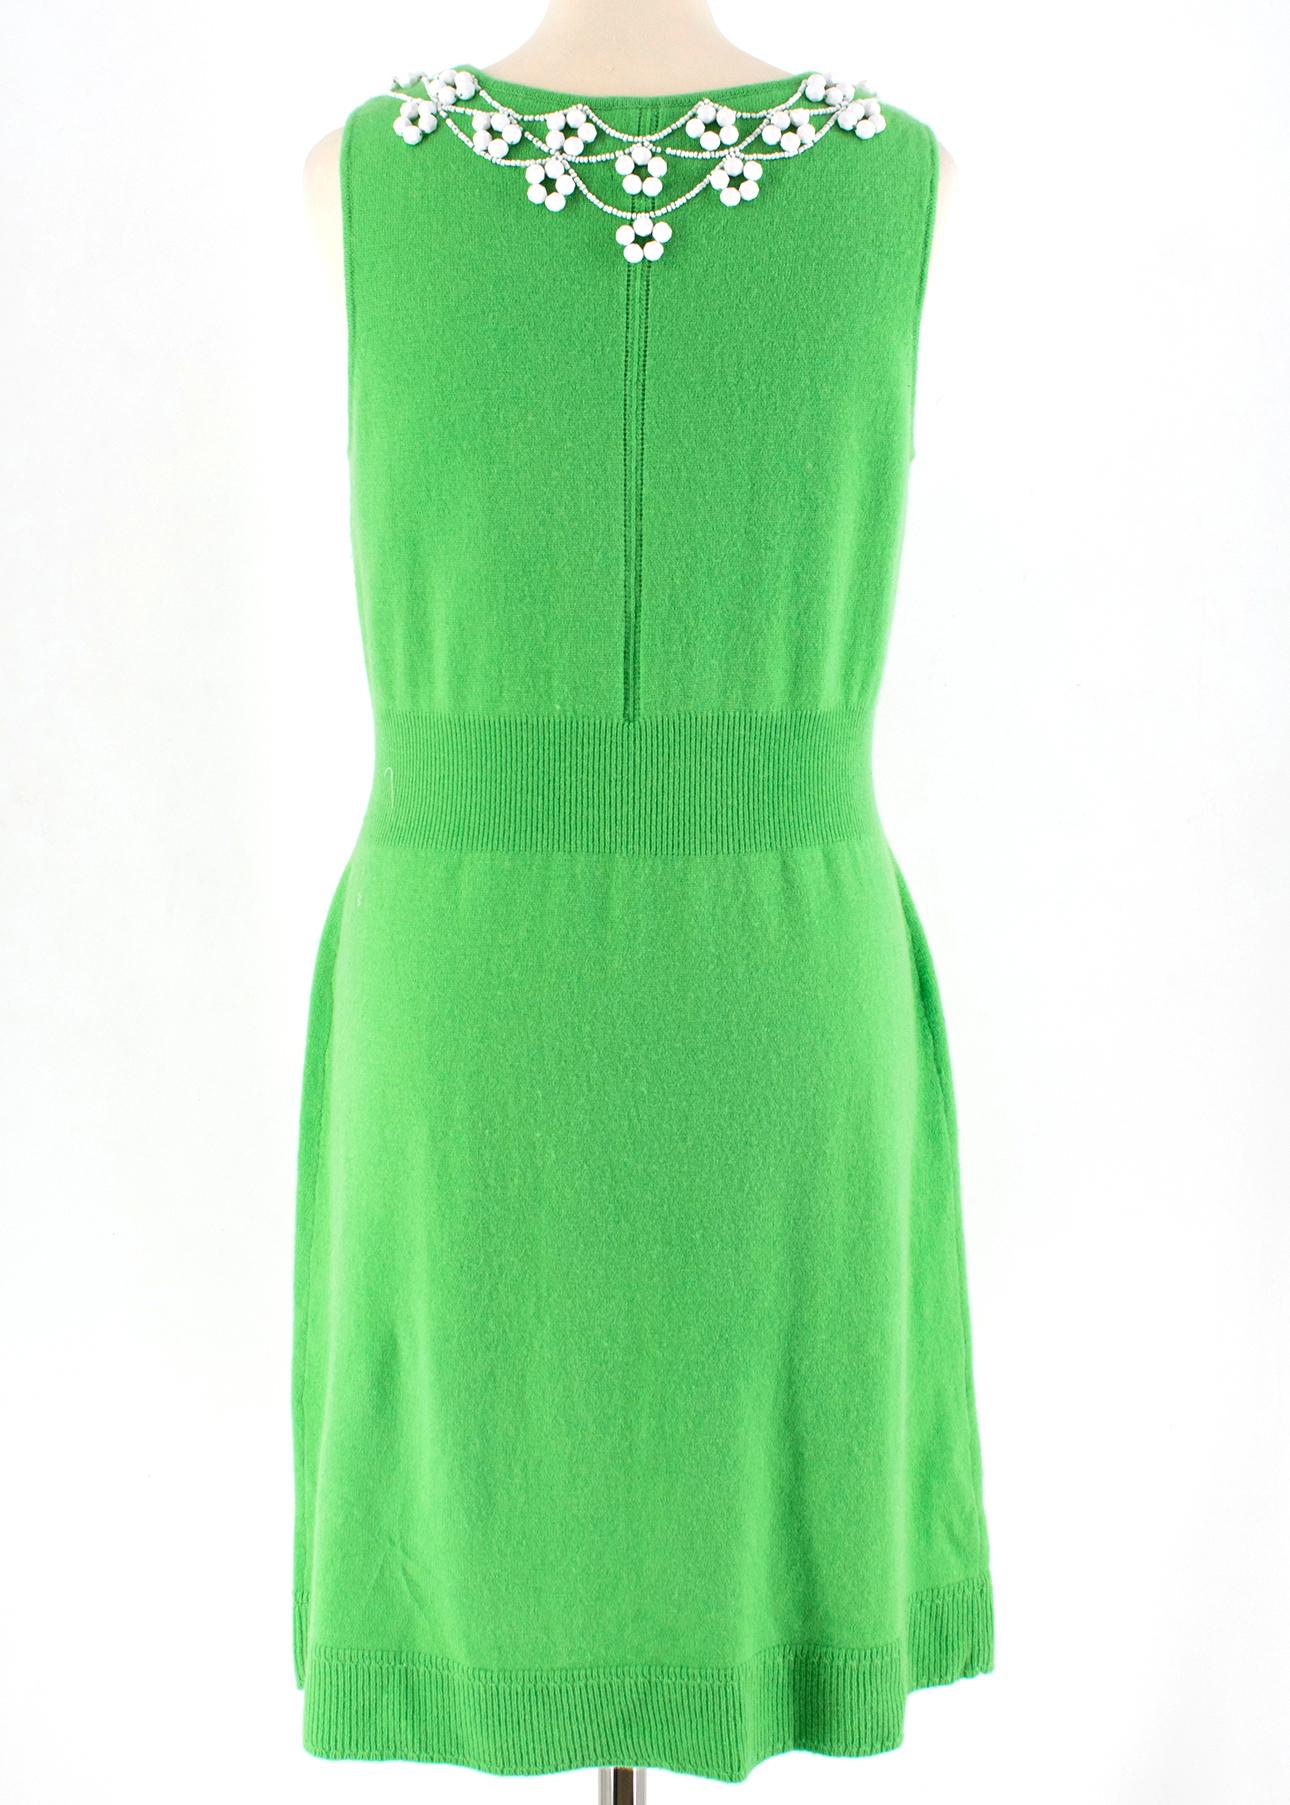 milly green dress